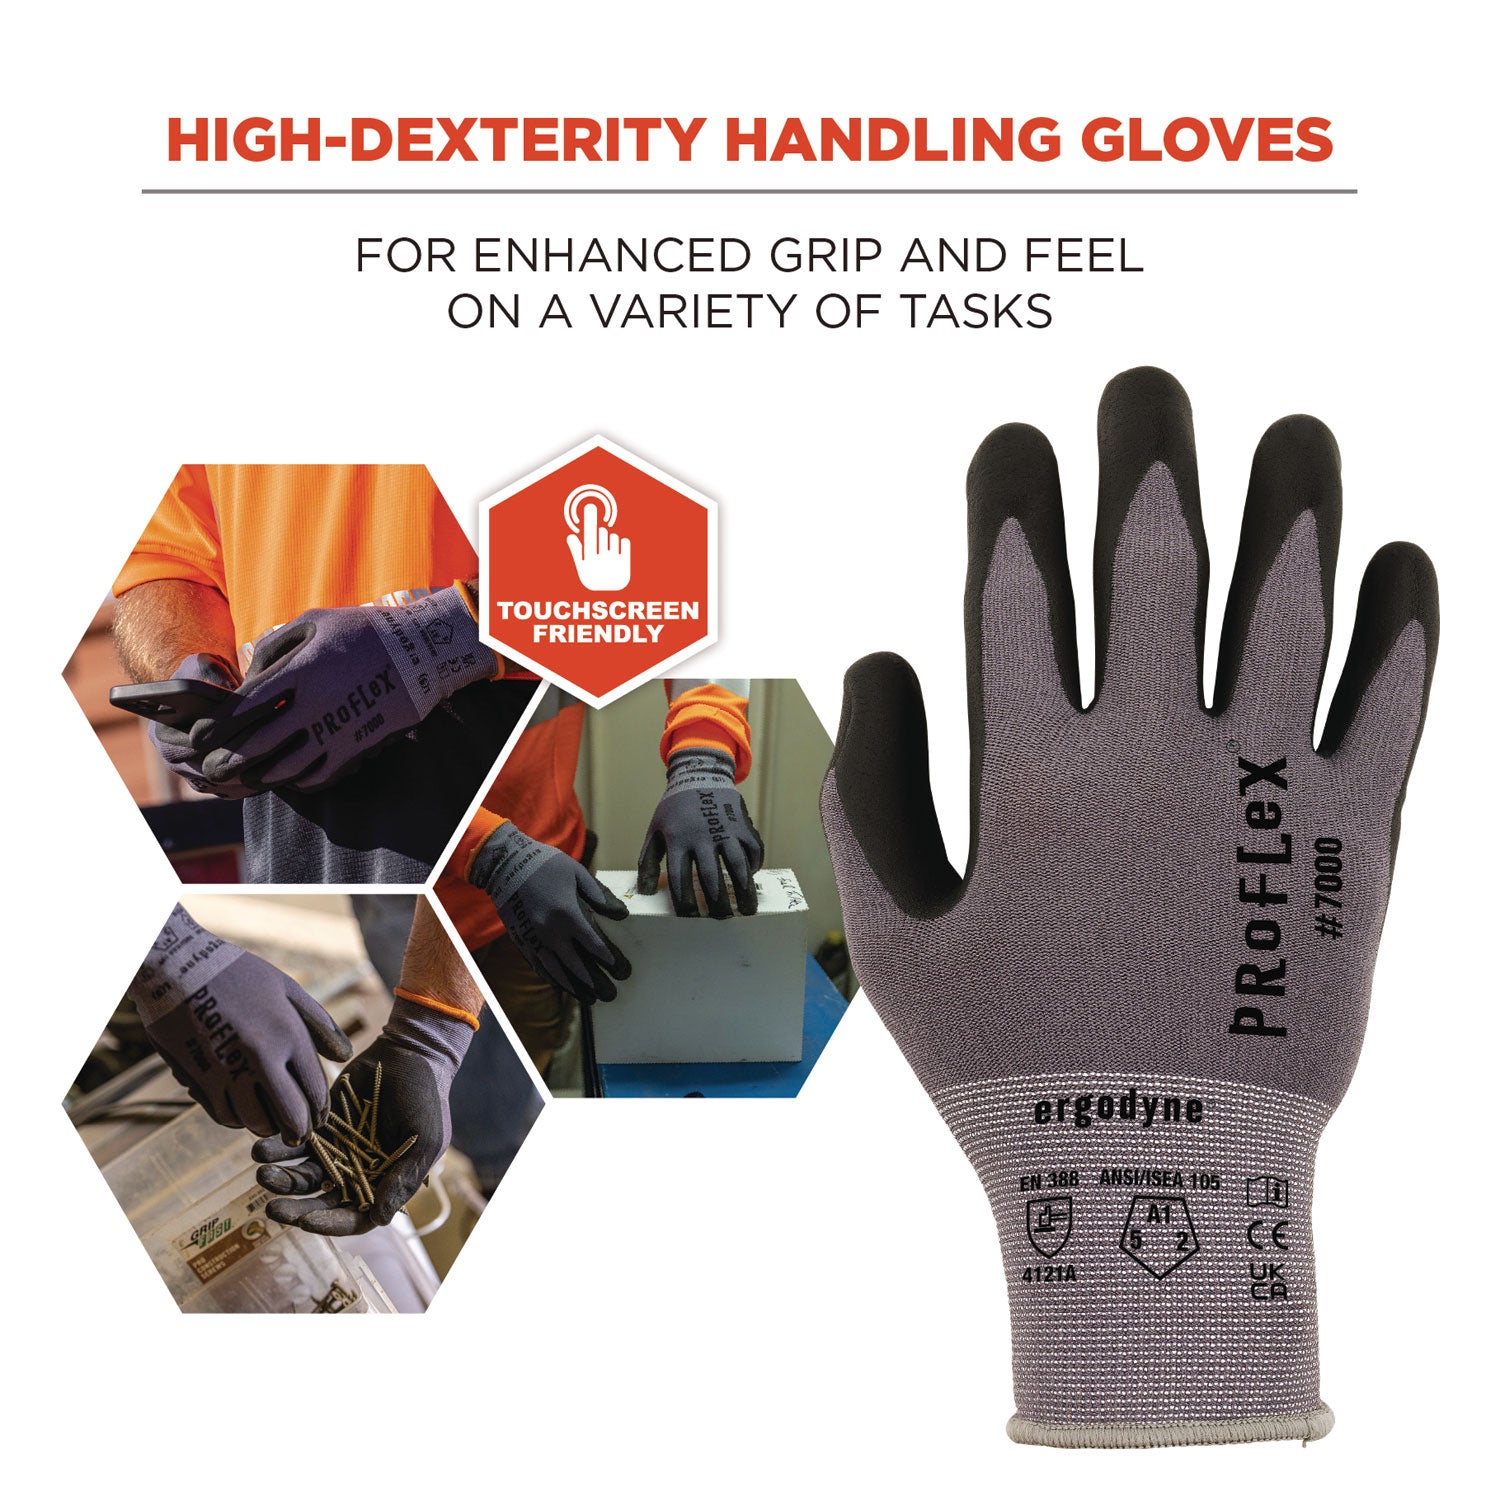 proflex-7000-nitrile-coated-gloves-microfoam-palm-gray-x-small-pair-ships-in-1-3-business-days_ego10371 - 2